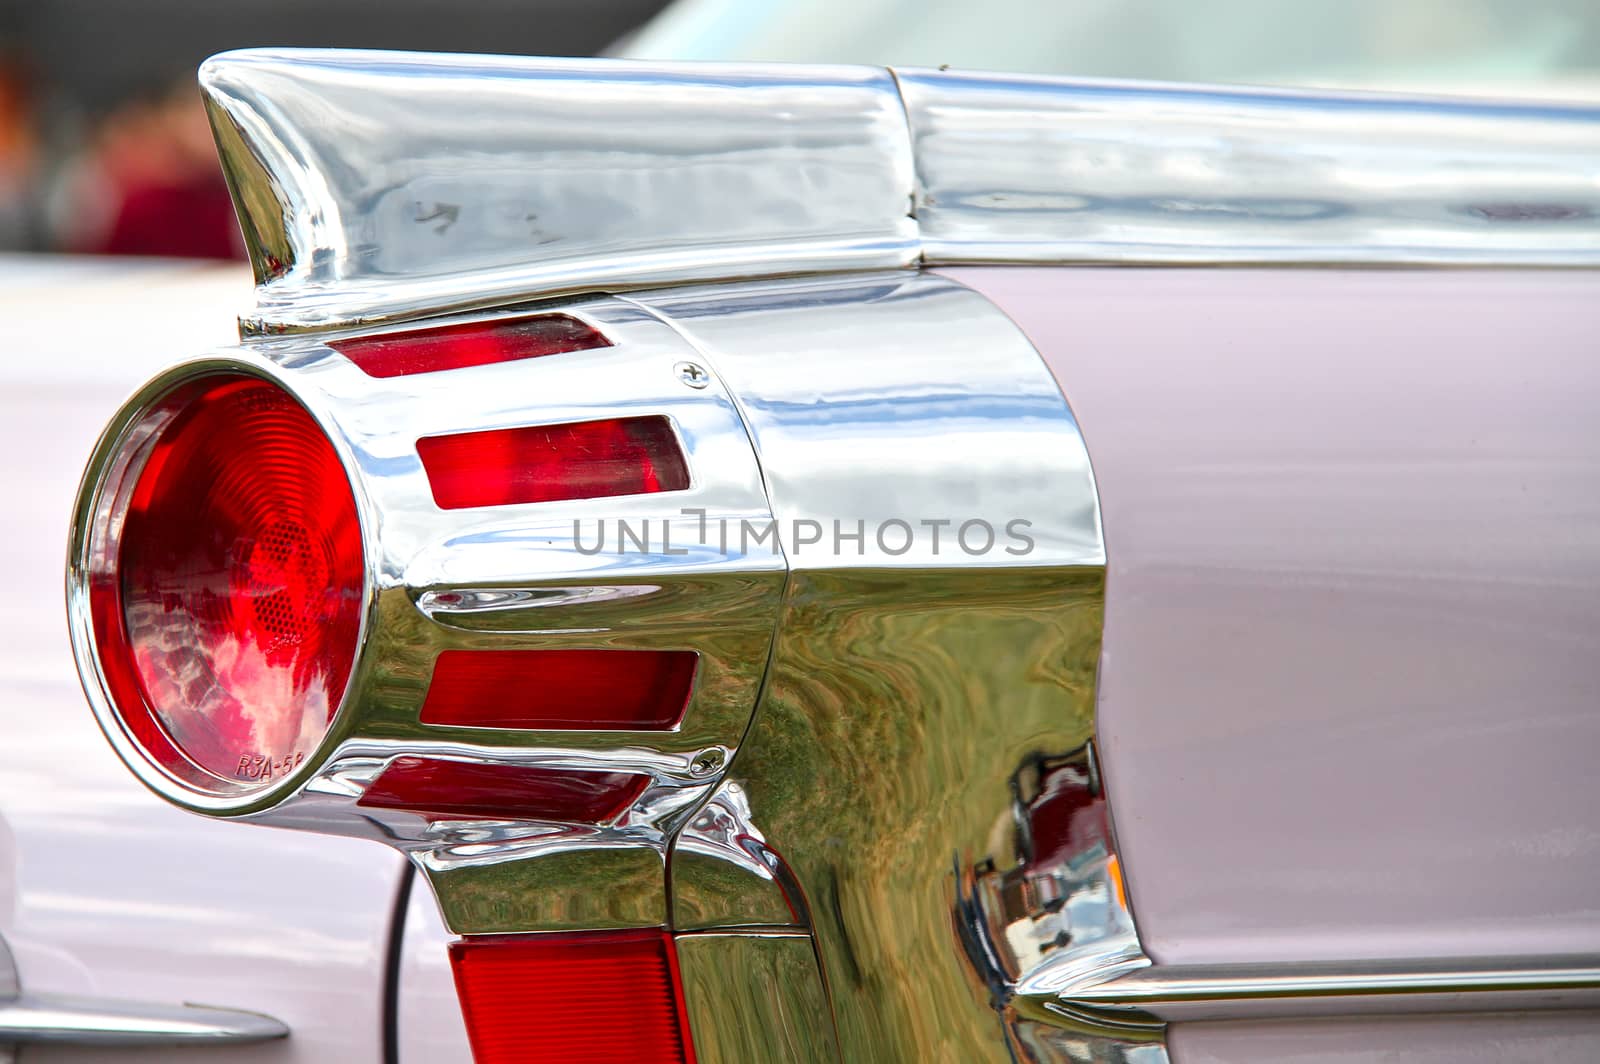 Round taillight of an old american car decorated with chrome.